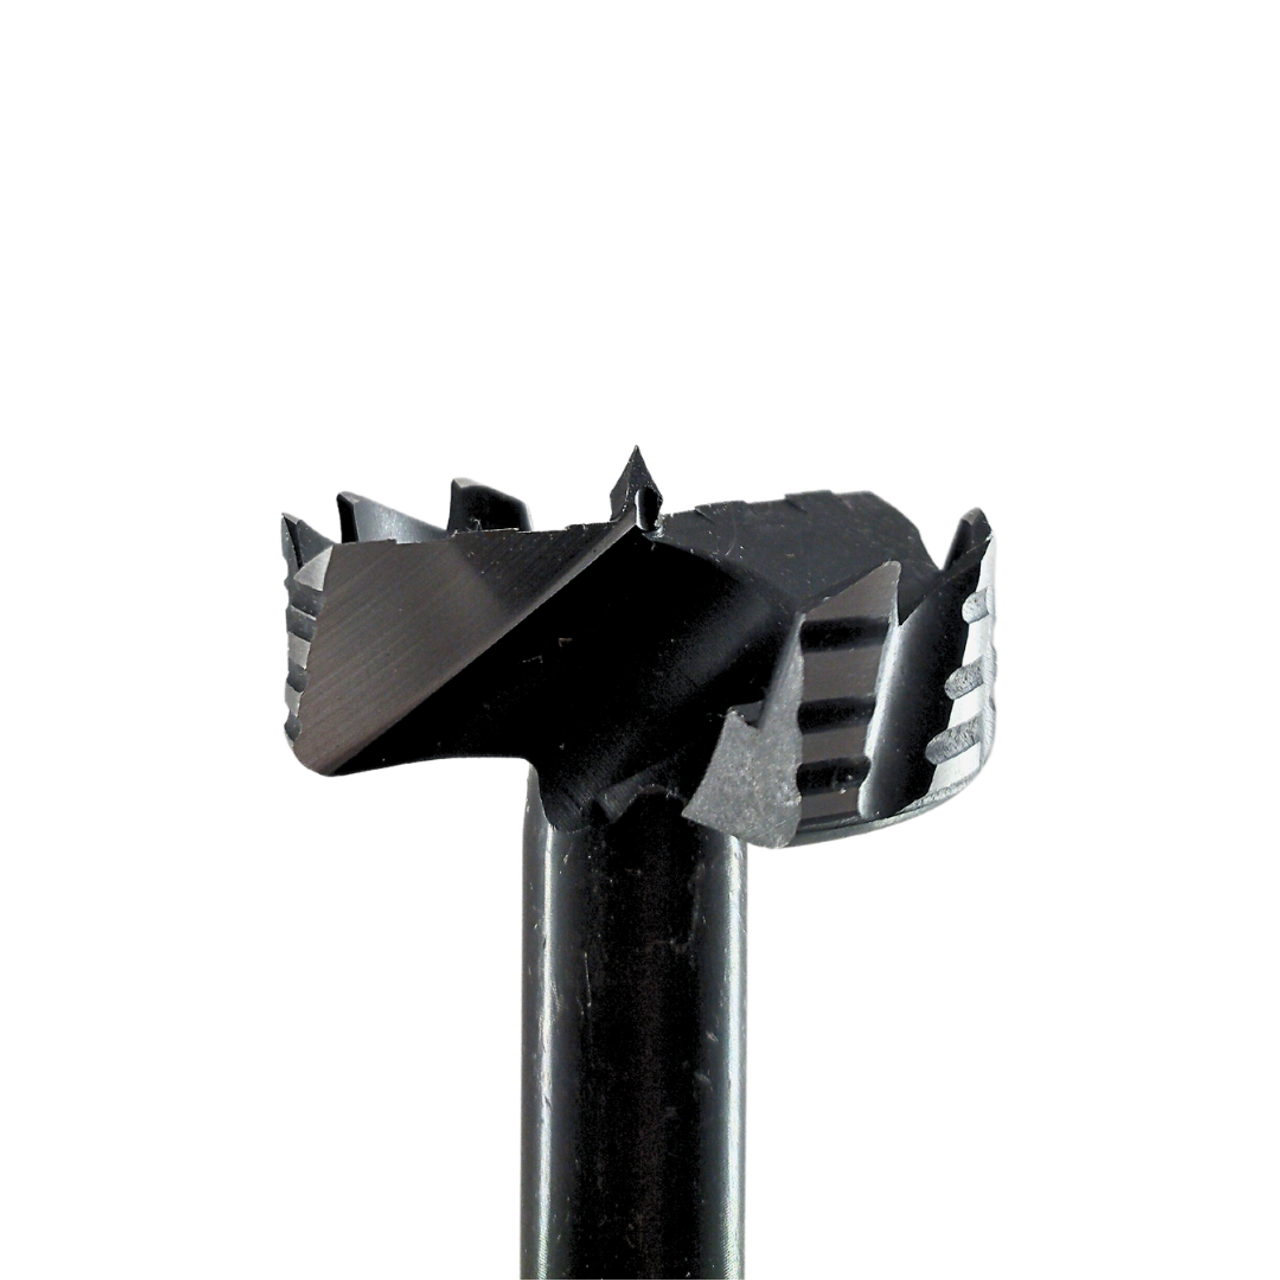 Get a closer look at the Famag Forstner Bits 1622 BORMAX 2.0 with Cutting Teeth, featuring a single-piece design and cutting teeth for precision and durability.